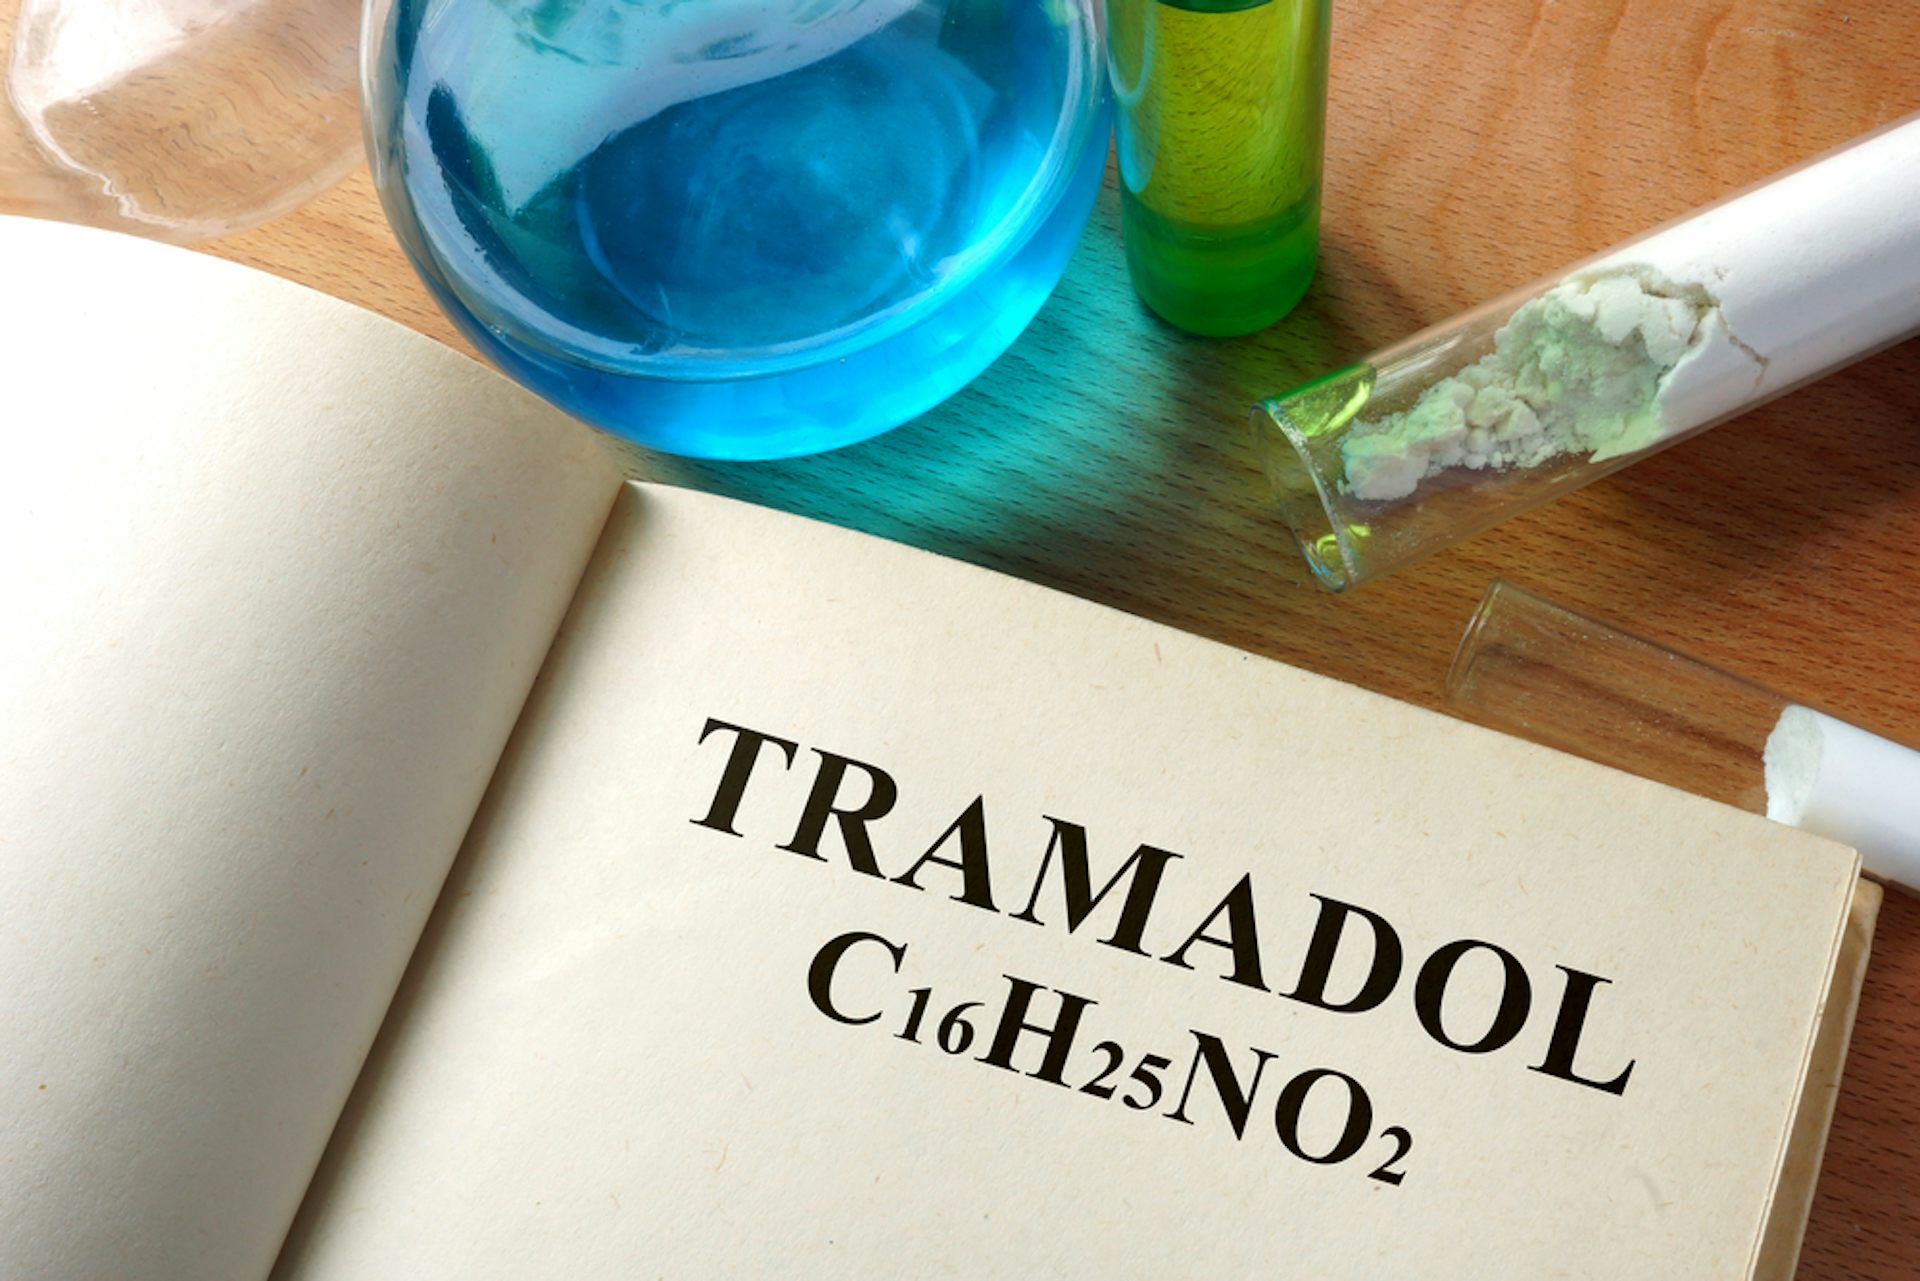 WHAT ARE THE DISADVANTAGE OF TRAMADOL